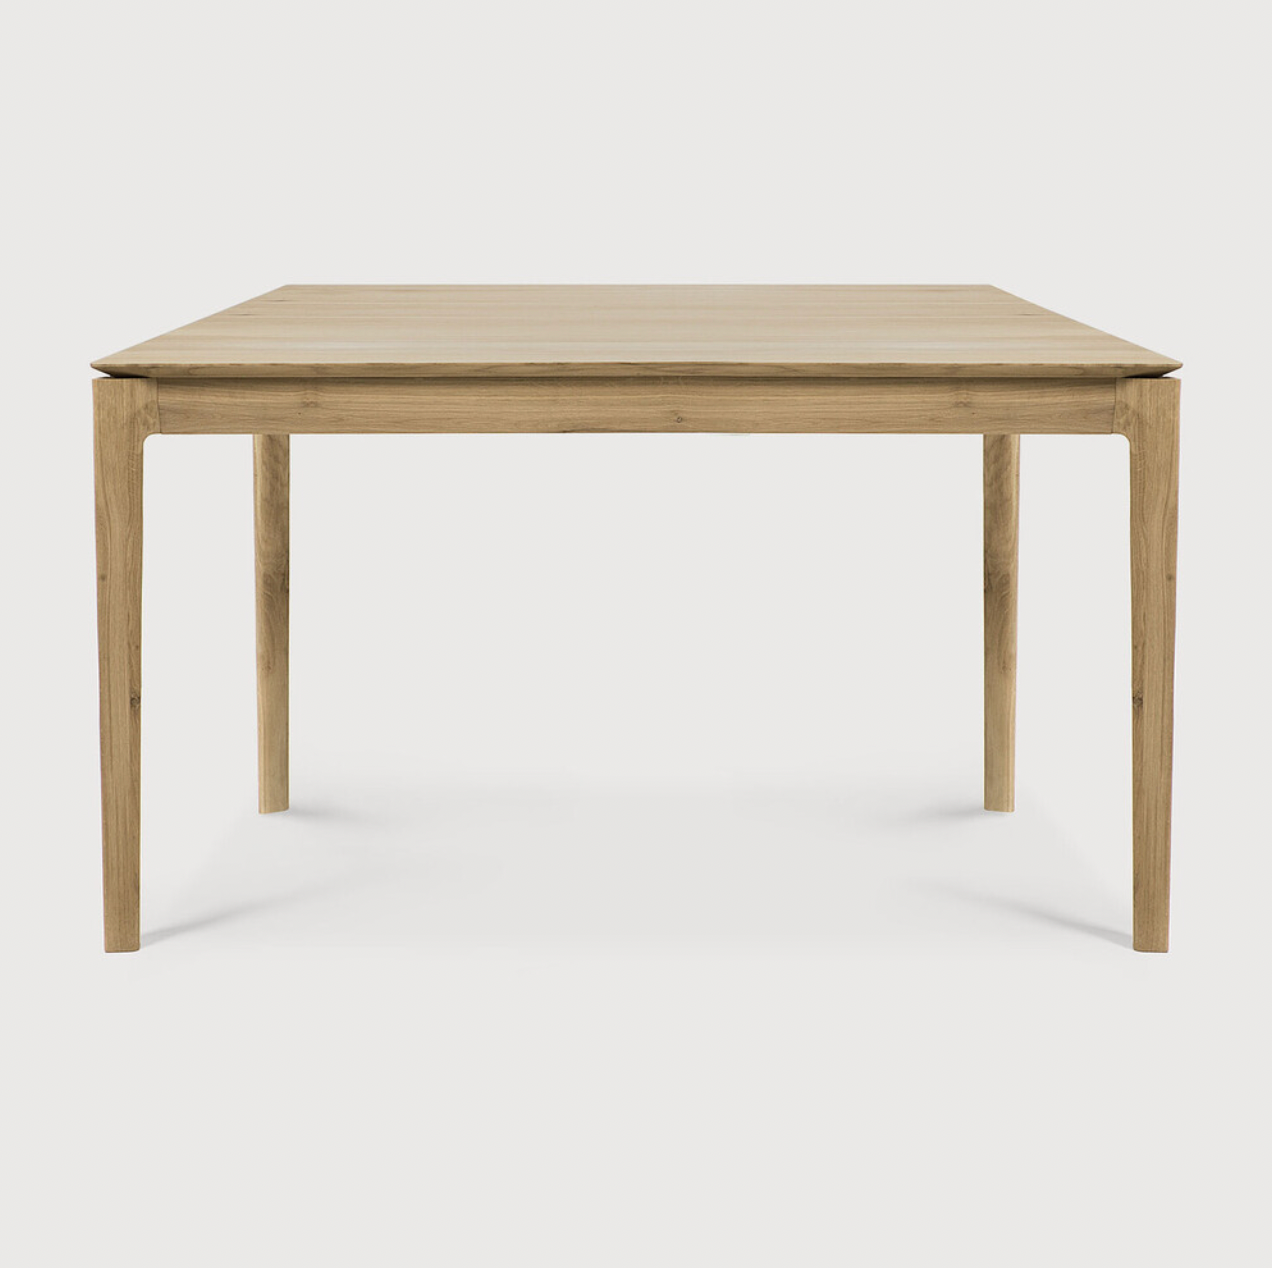 The airy shape yet rock solid construction make this Oak Bok Dining Table a timeless and remarkable design to enjoy for years to come. Available in many sizes, this can fit any dining room or kitchen area.   Material: Oak, 100% Solid Wood Finish: Oiled